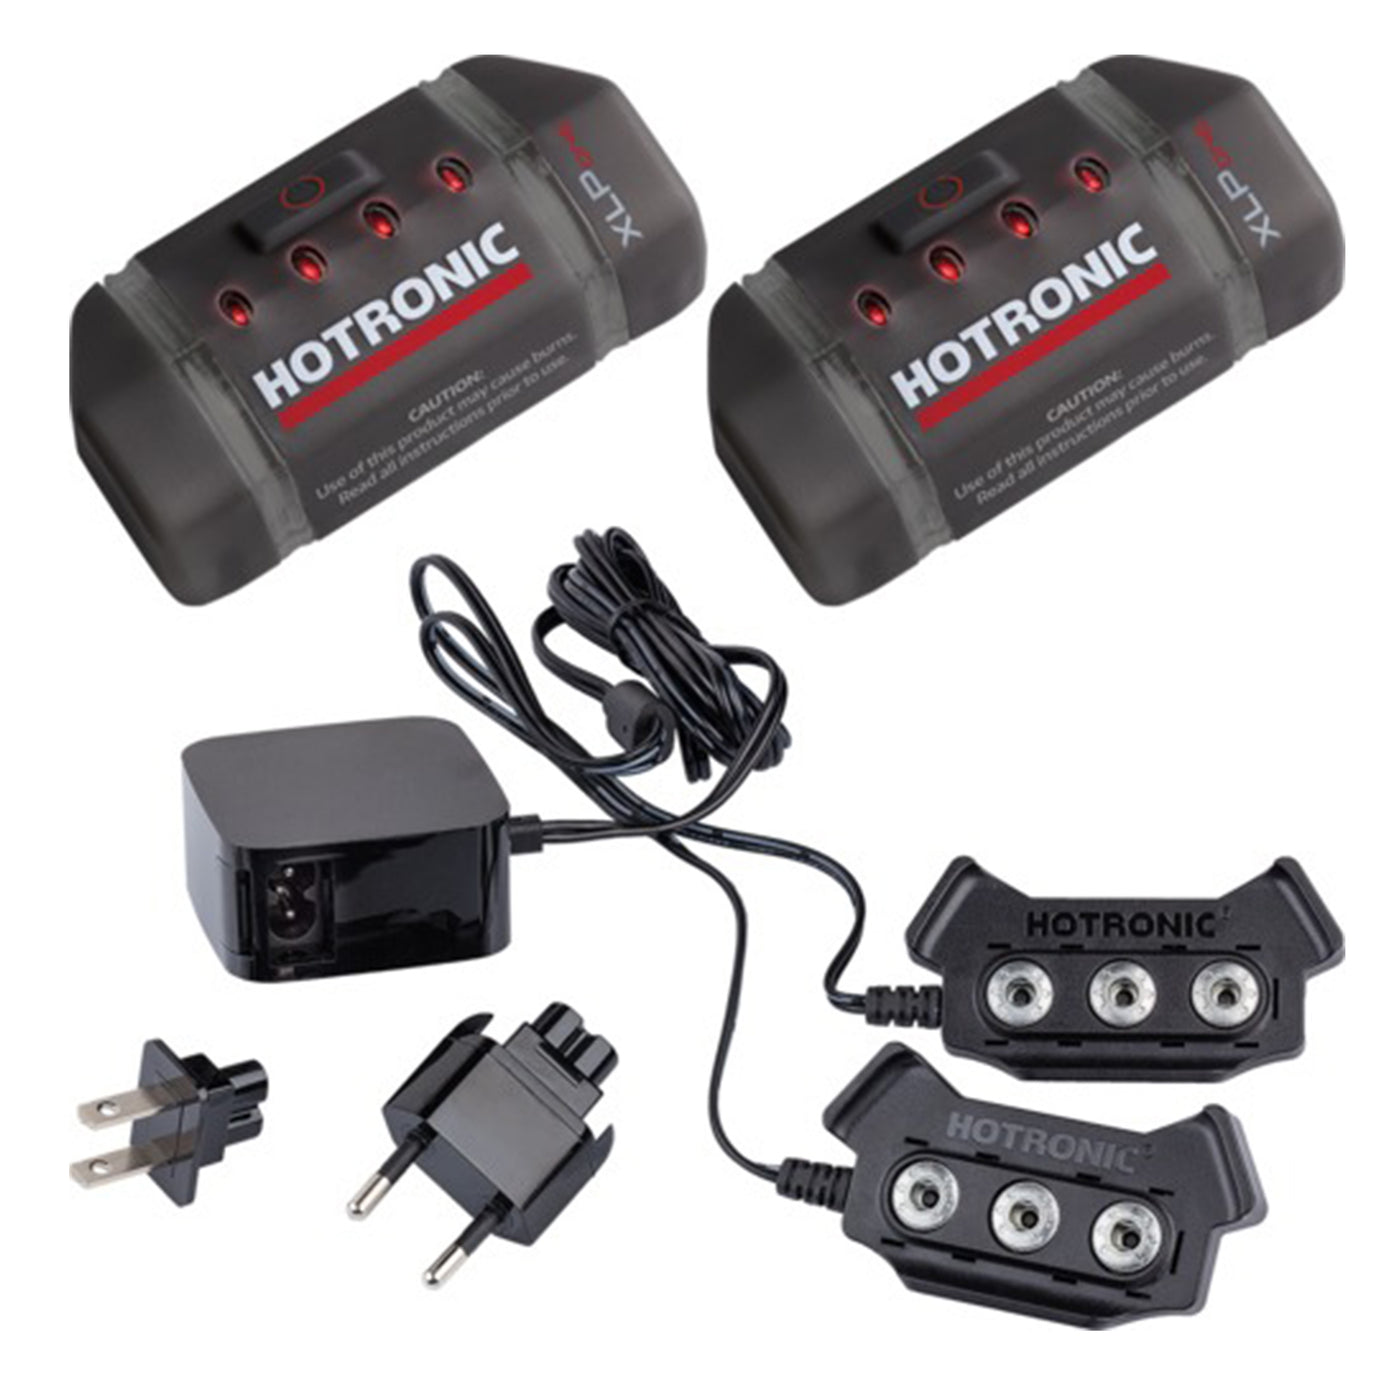 Hotronic XLP One Power Set Sock Warmer Battery Pack HEATED ACCESSORIES Hotronic   